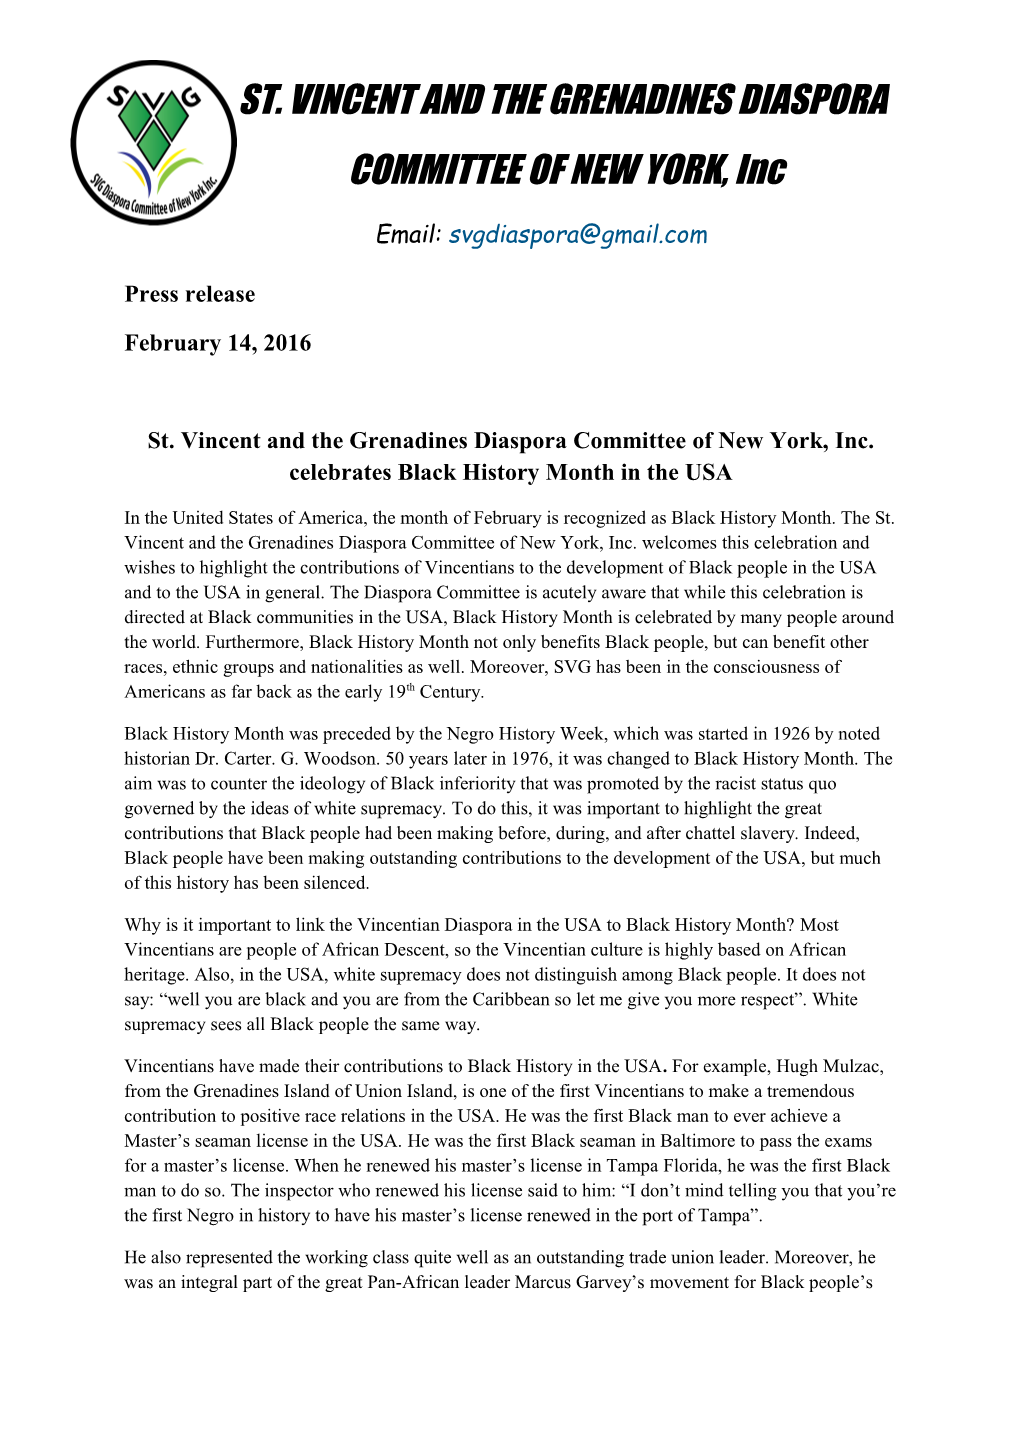 St. Vincent and the Grenadines Diaspora Committee of New York, Inc. Celebrates Black History